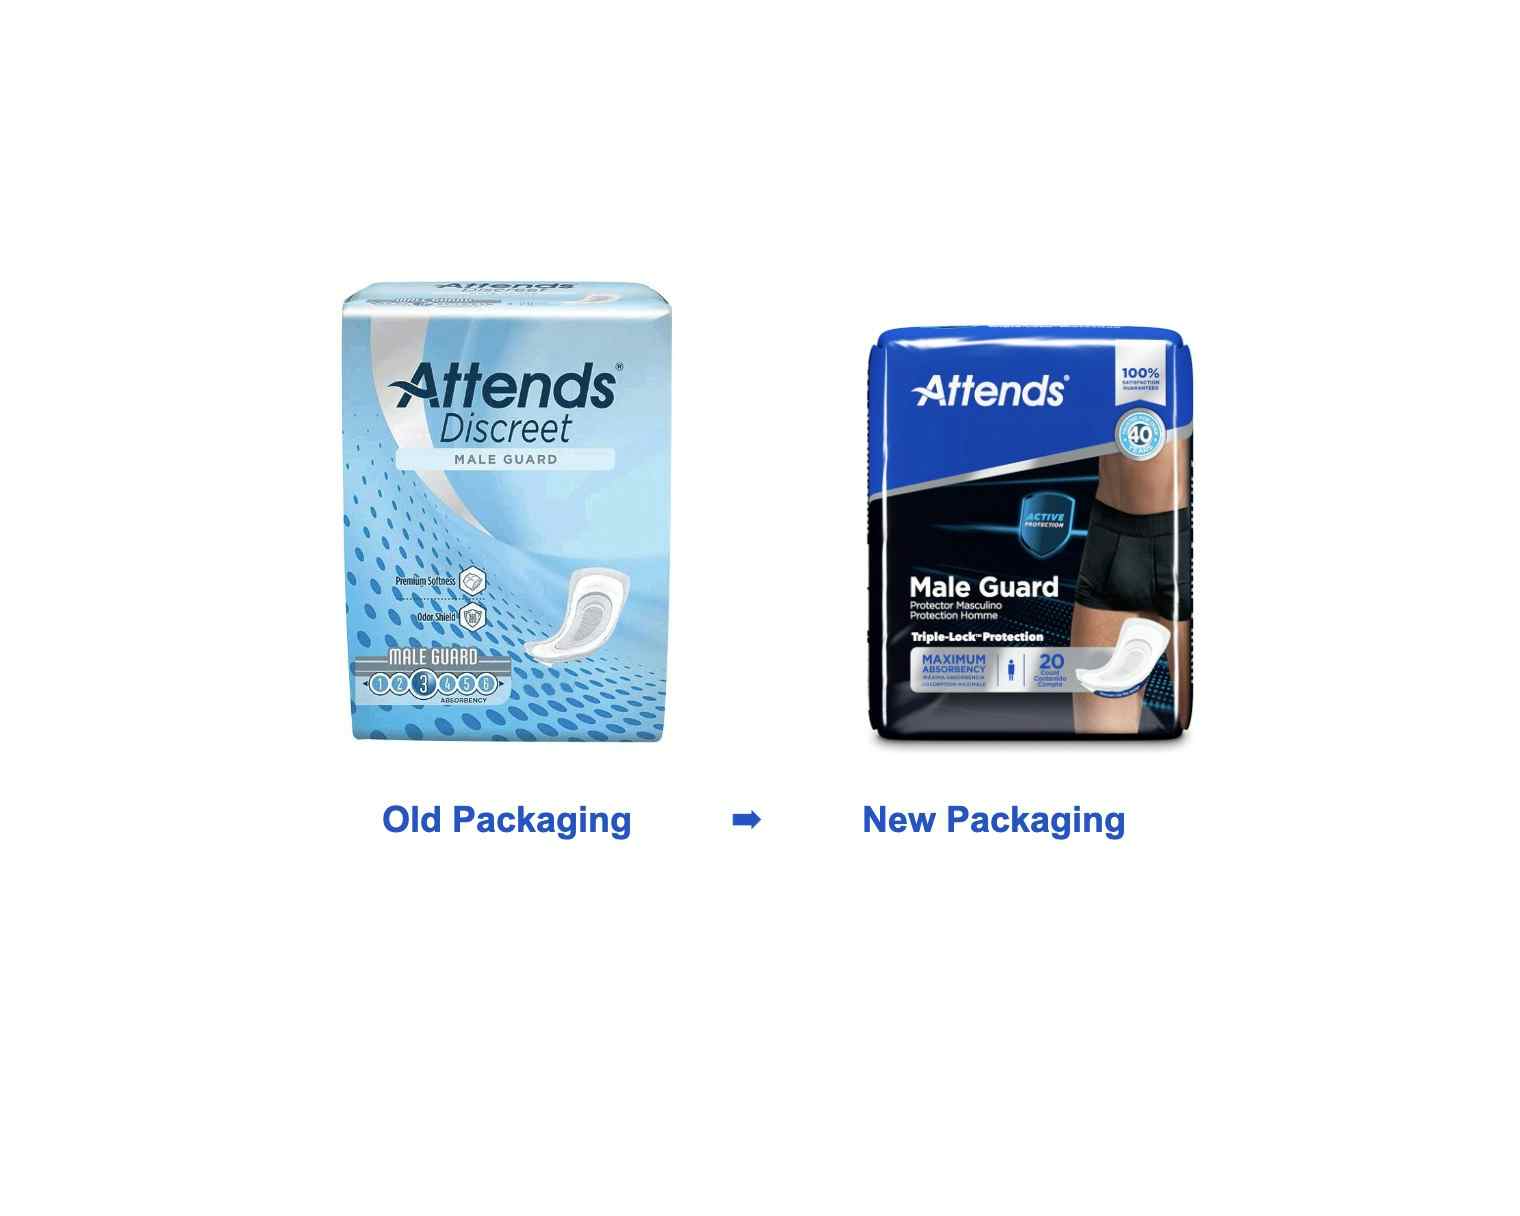 Attends Discreet Male Guards, Old vs New Packaging